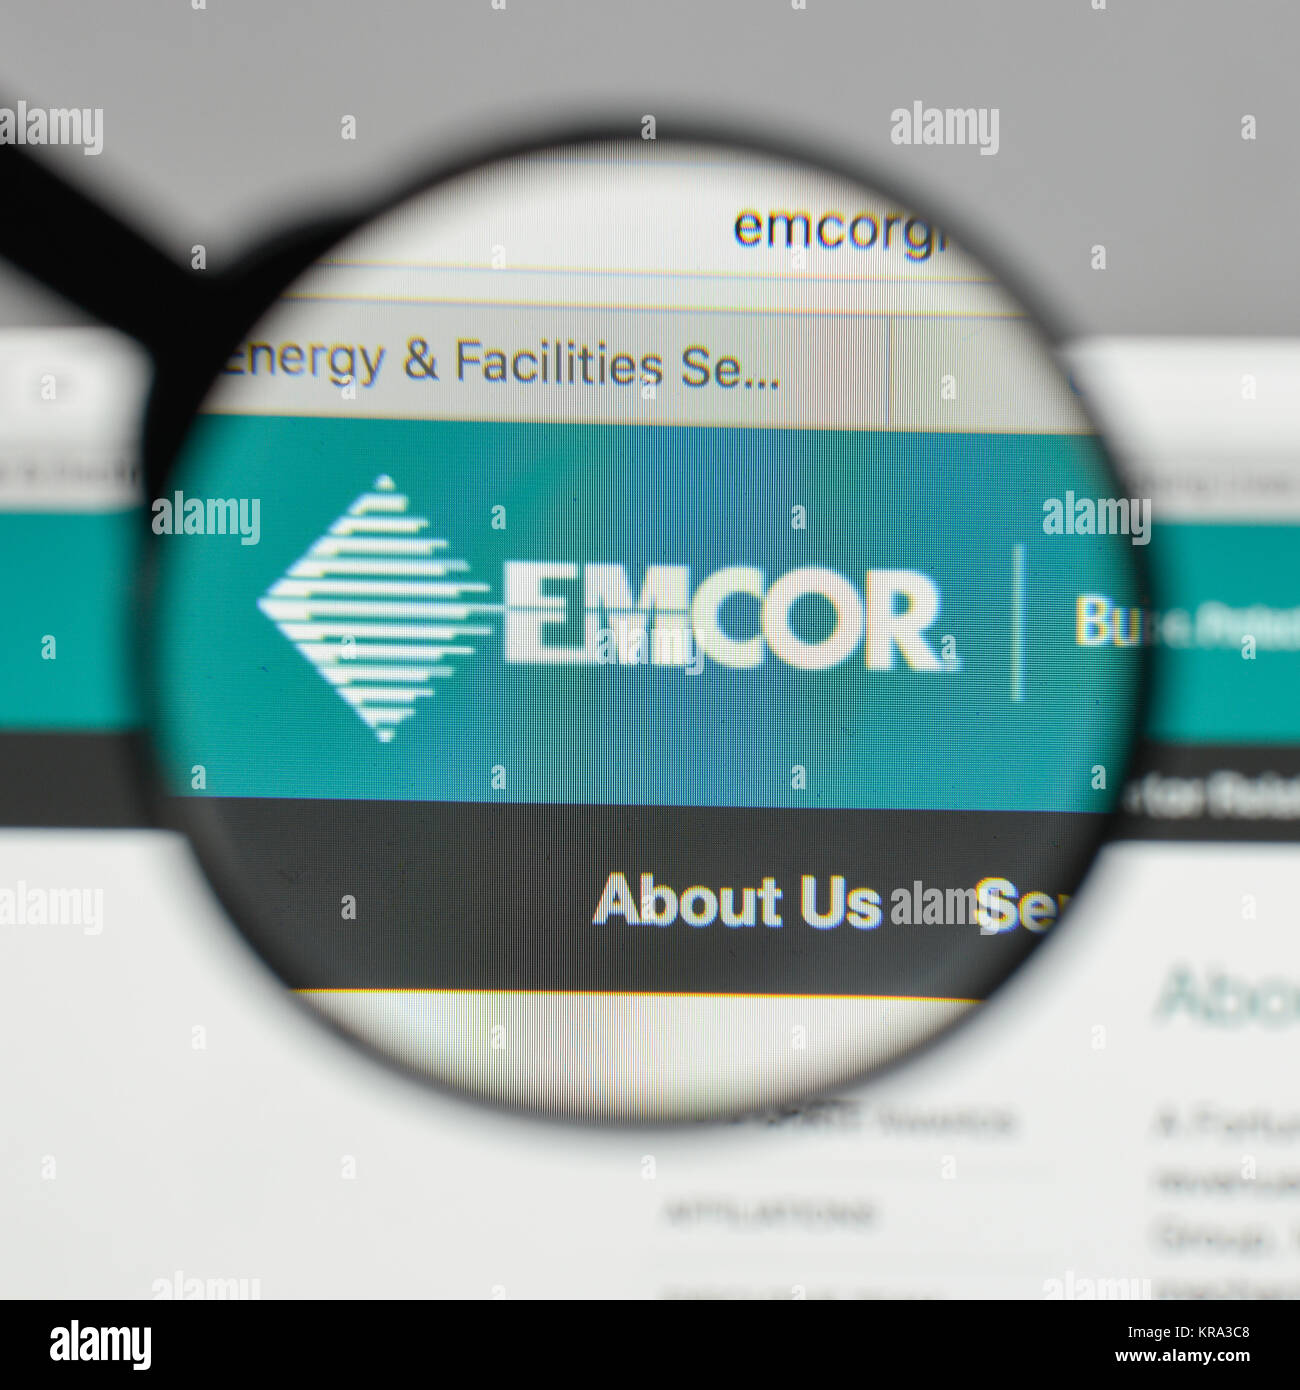 Milan, Italy - August 10, 2017: EMCOR Group logo on the website homepage. Stock Photo